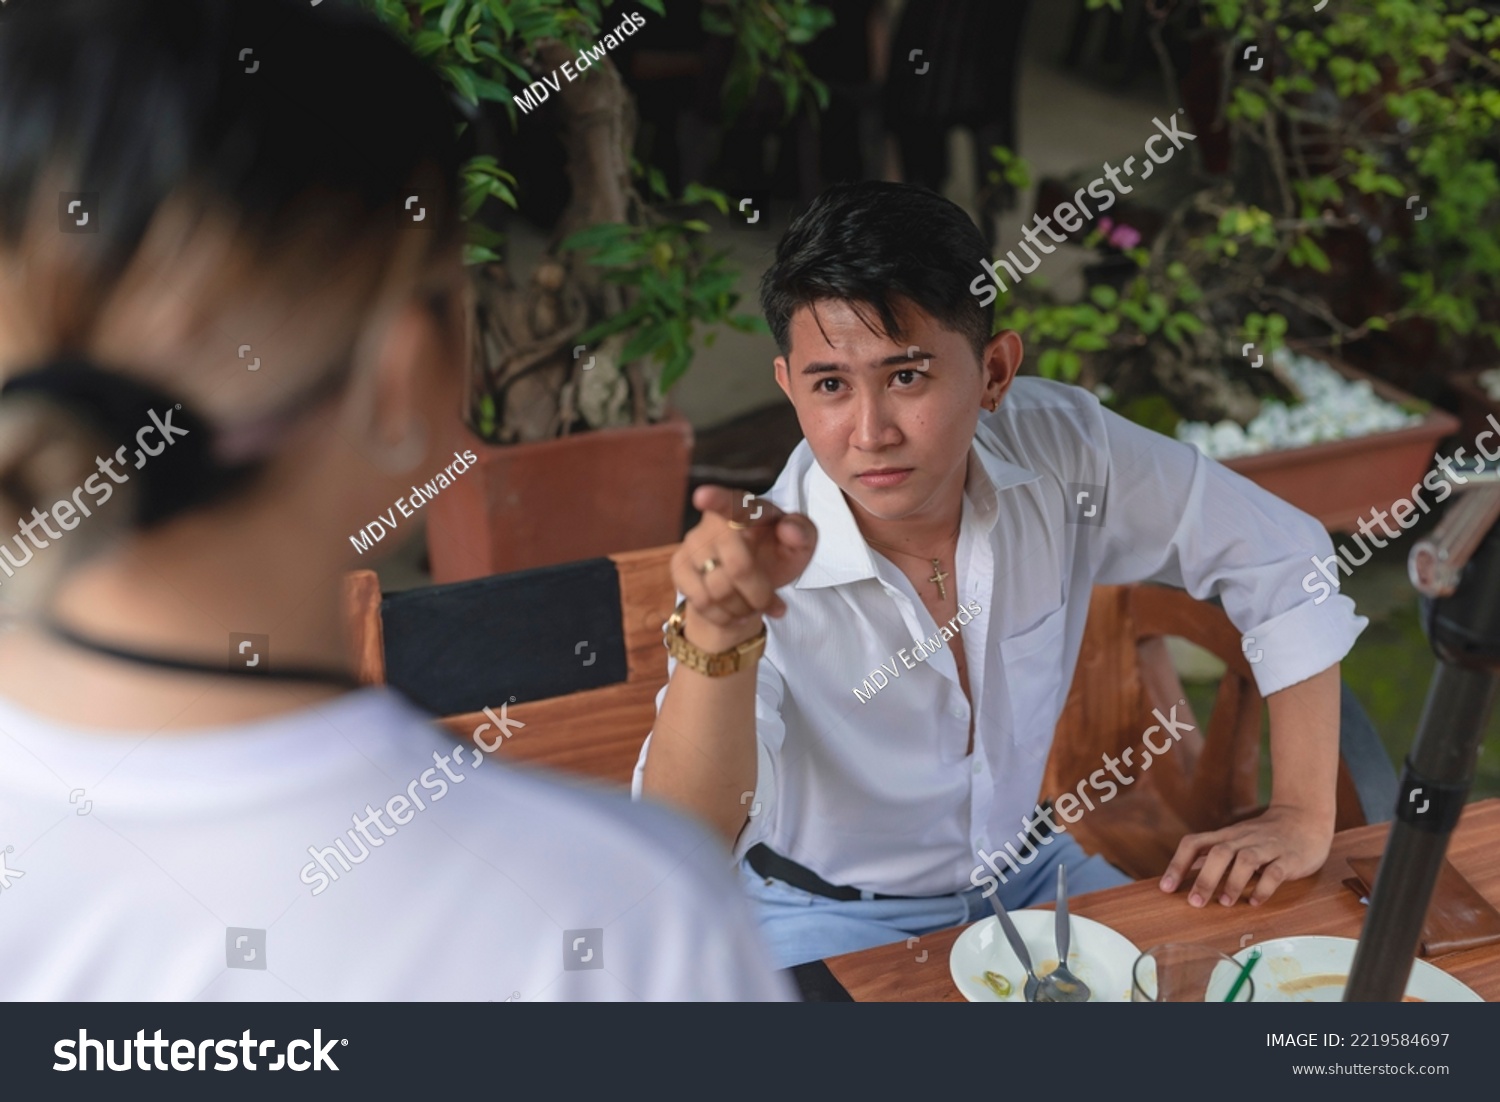 An arrogant young man complains about poor service or terrible food to a waitress. A rude and condescending customer belittling and criticizing the restaurant staff. #2219584697